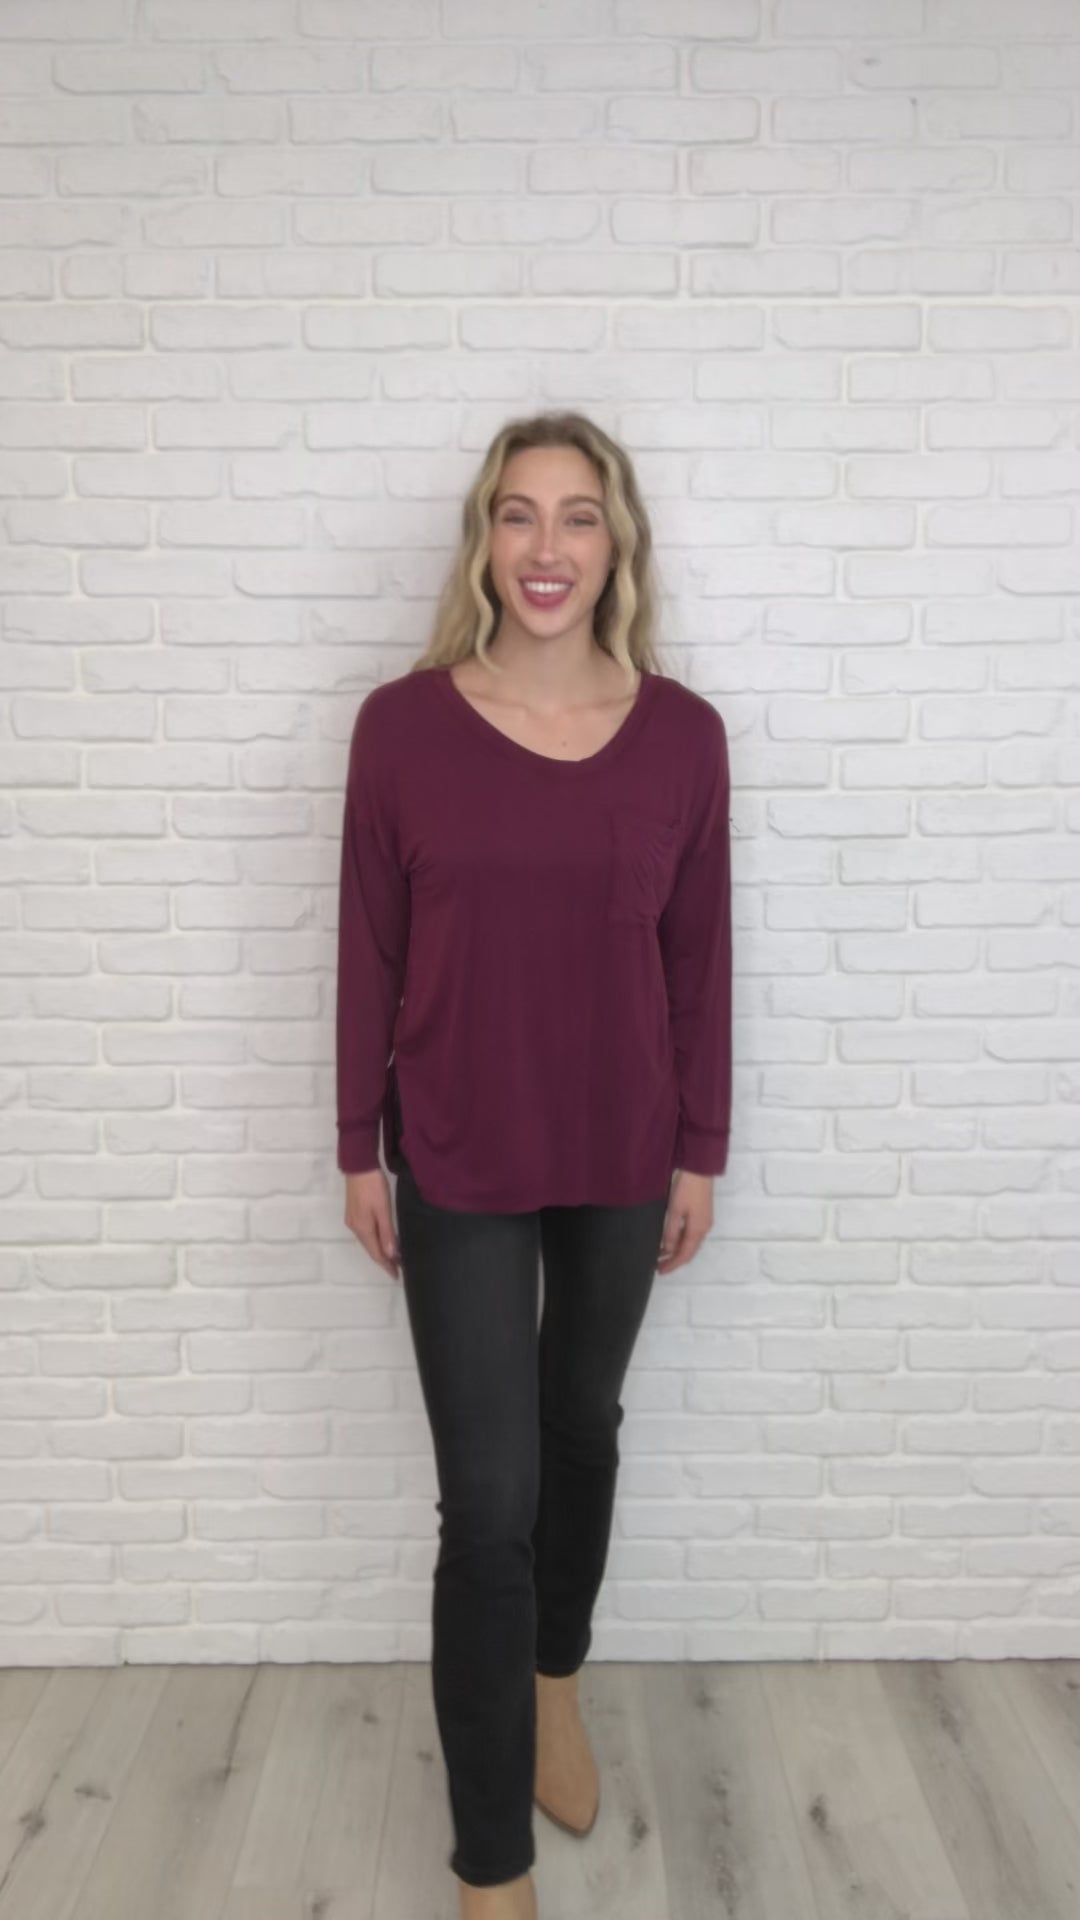 Long Sleeve Knit Top With Pocket In Burgundy